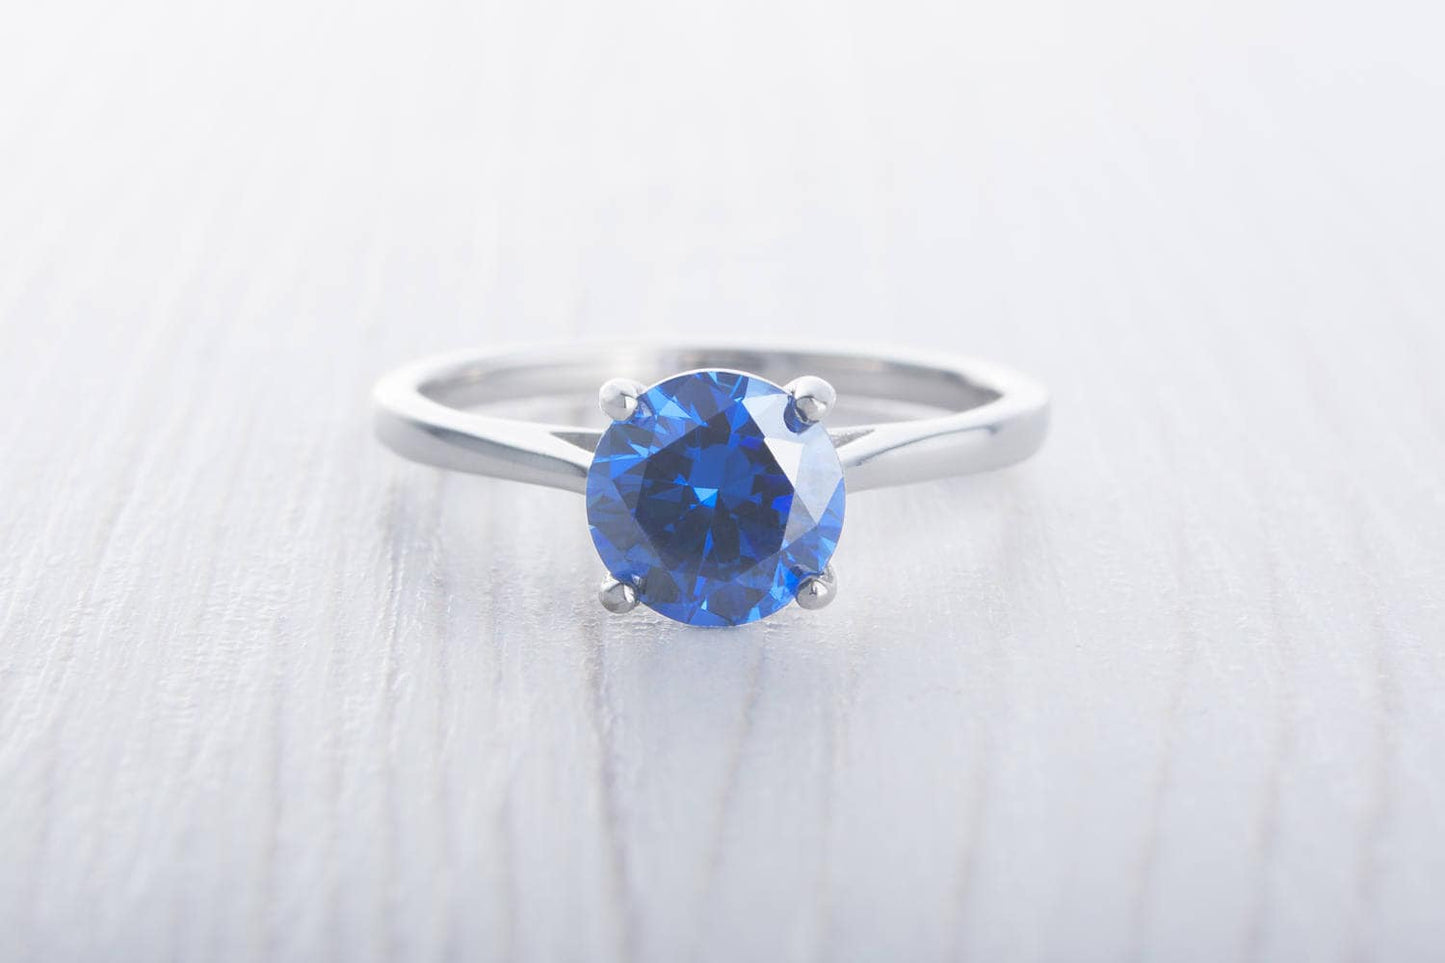 Genuine 1.5ct London Blue Topaz solitaire ring in Titanium or White Gold - engagement ring - wedding ring - handmade ring